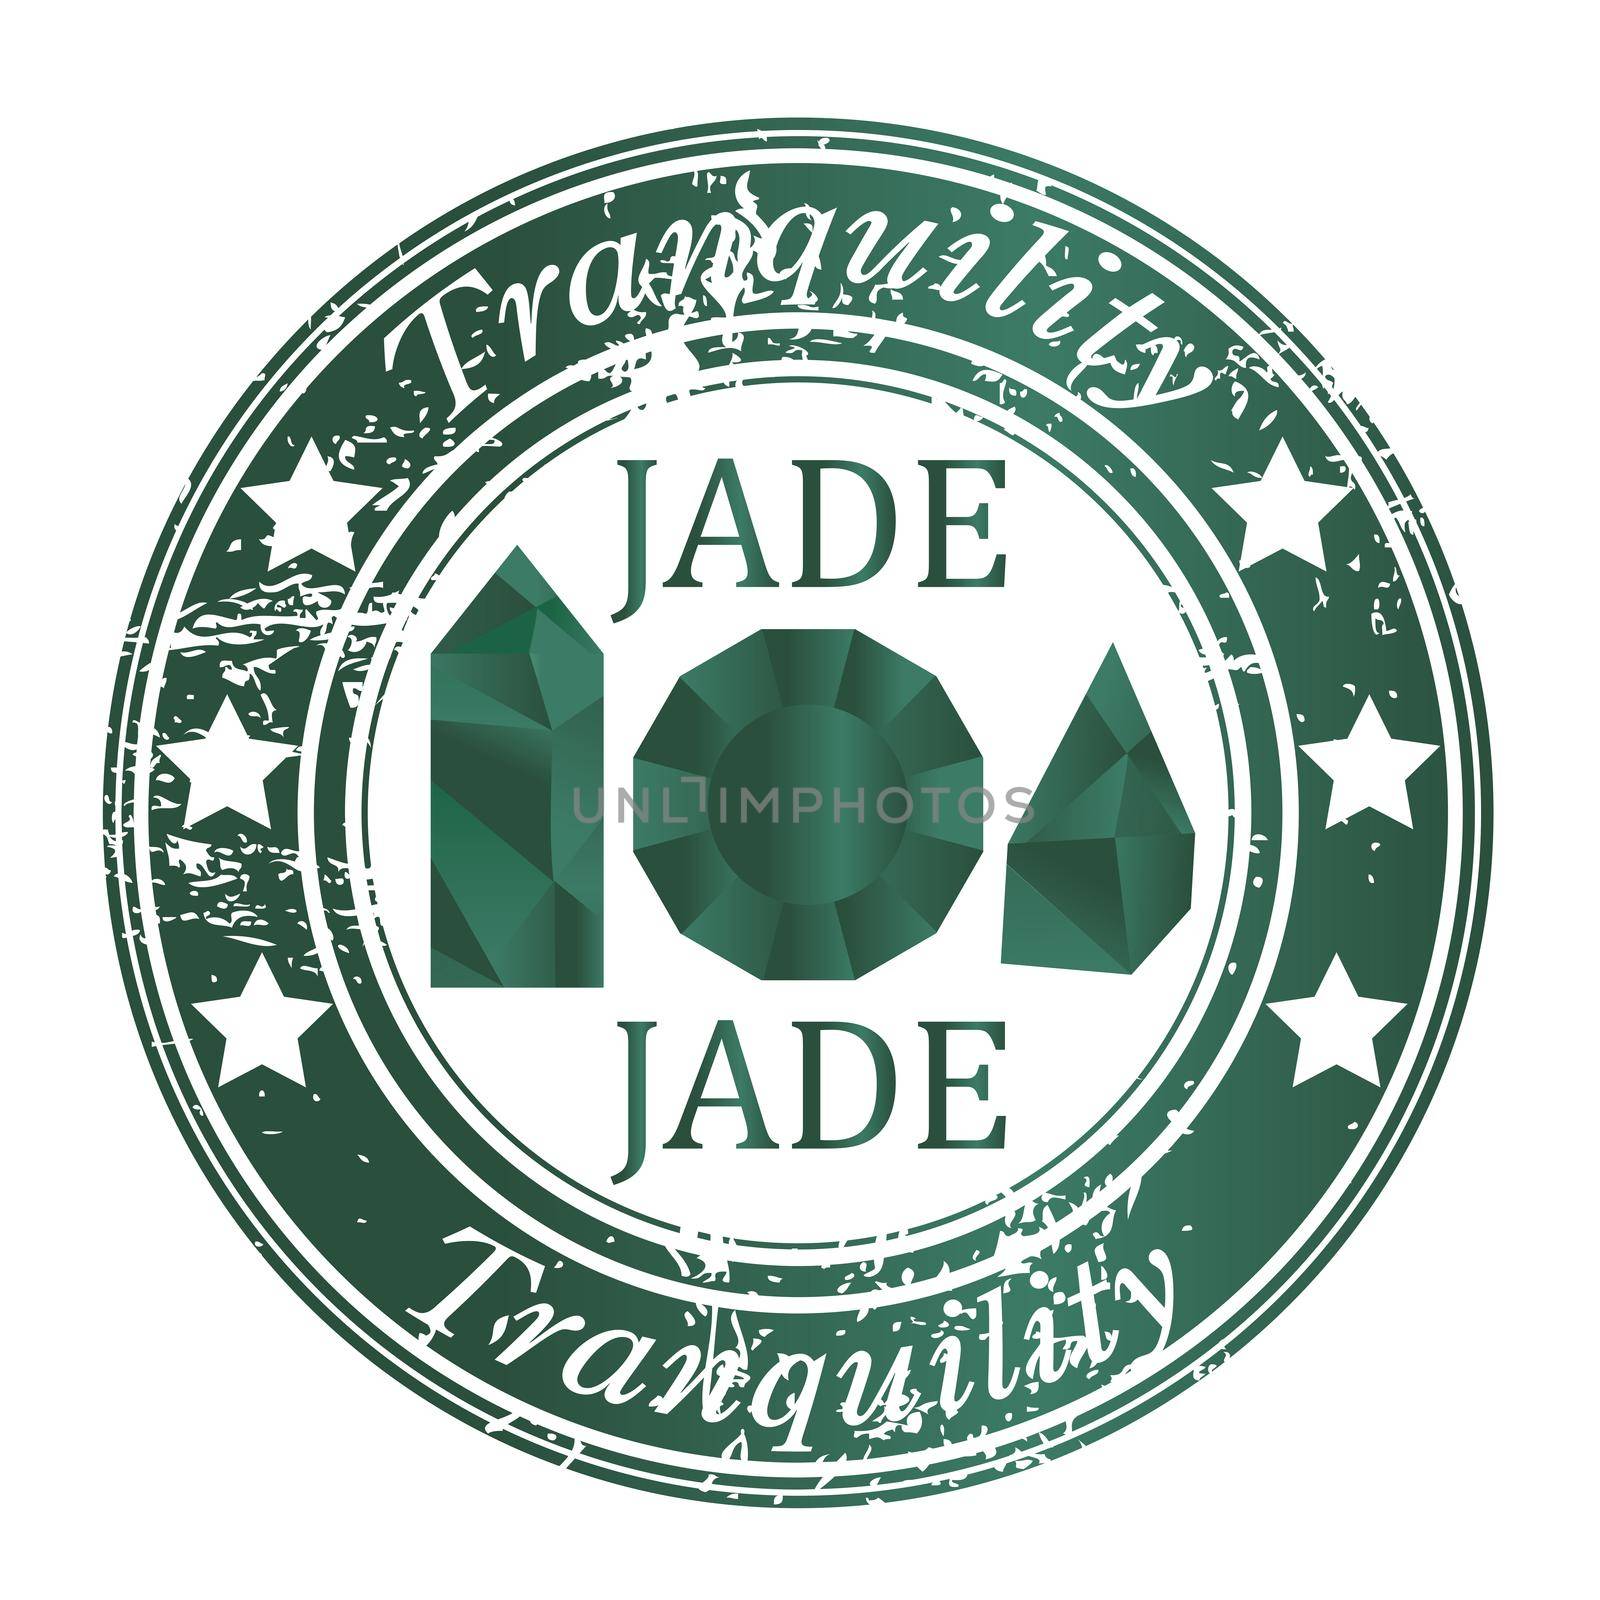 Ruber stamp with jade gems and jade benefit by hibrida13